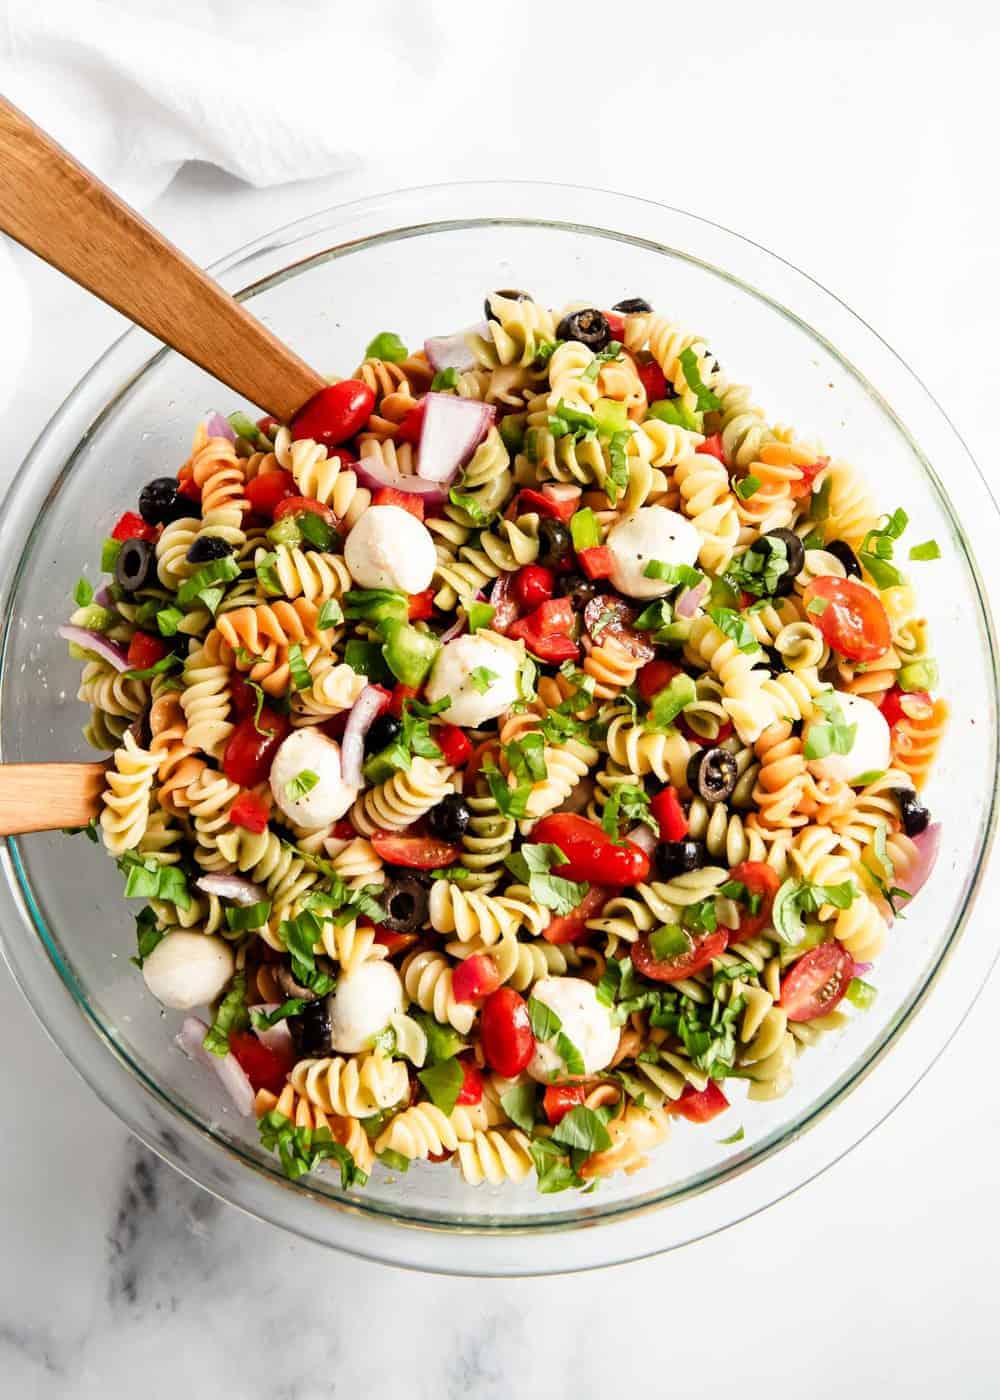 Pasta salad in bowl with wooden spoons.